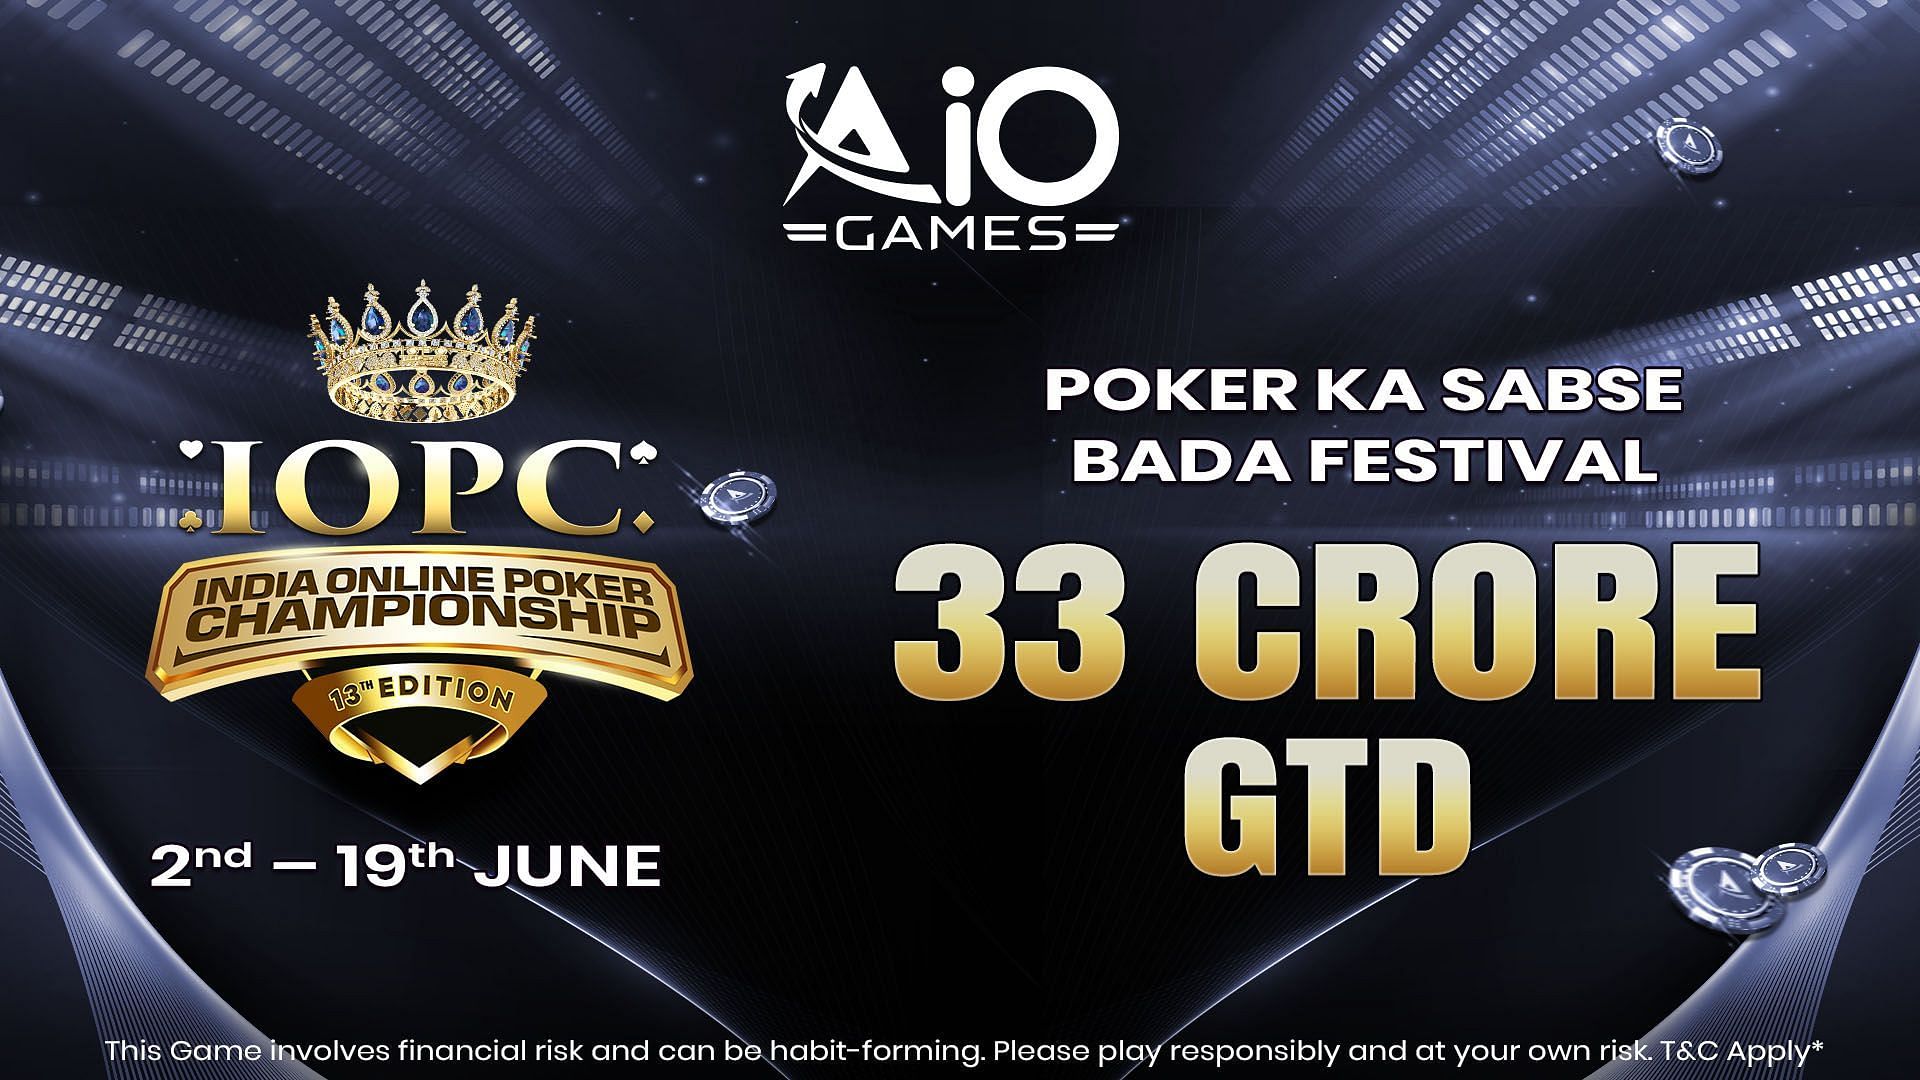 Get Ready for The Biggest Poker Championship - IOPC June '22!